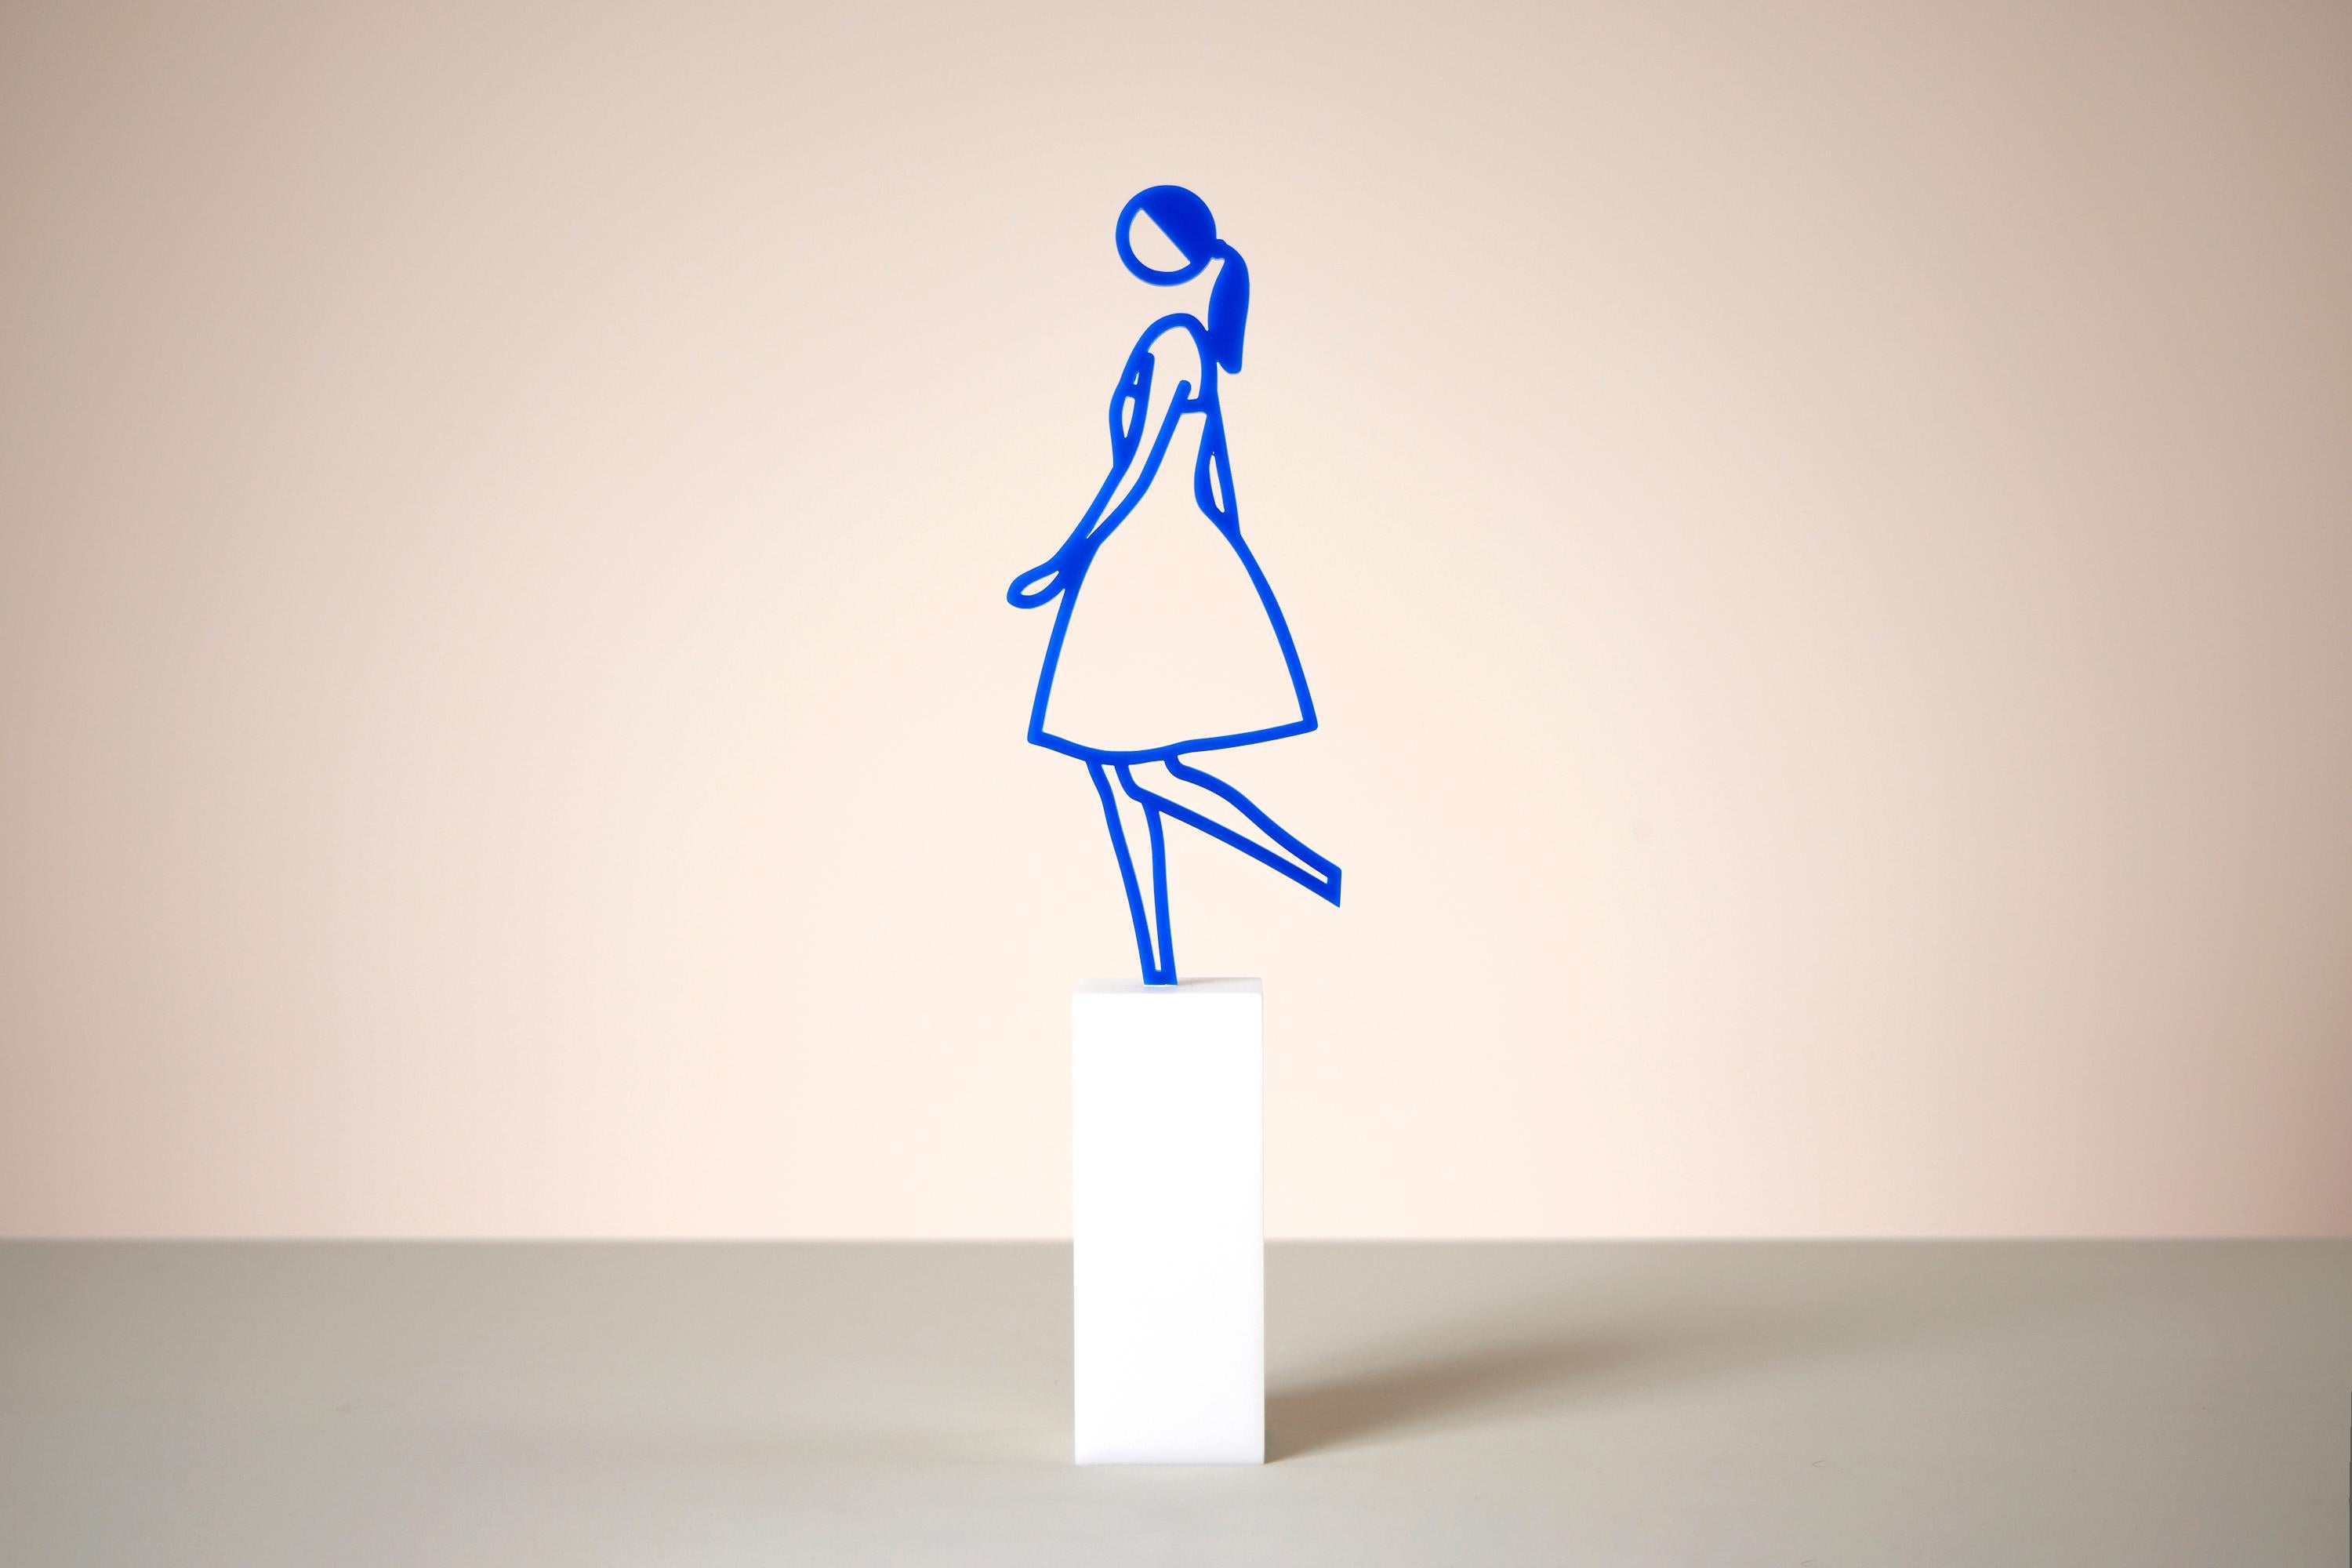 Amelia, 2019
Julian Opie

Polished acrylic on corian base
Signed and inscribed 'A.P.' on underside
One of five artist’s proofs aside from the numbered edition of 25
Multiple: 20 × 10 × 5 cm (7.8 × 3.9 × 1.9 in)